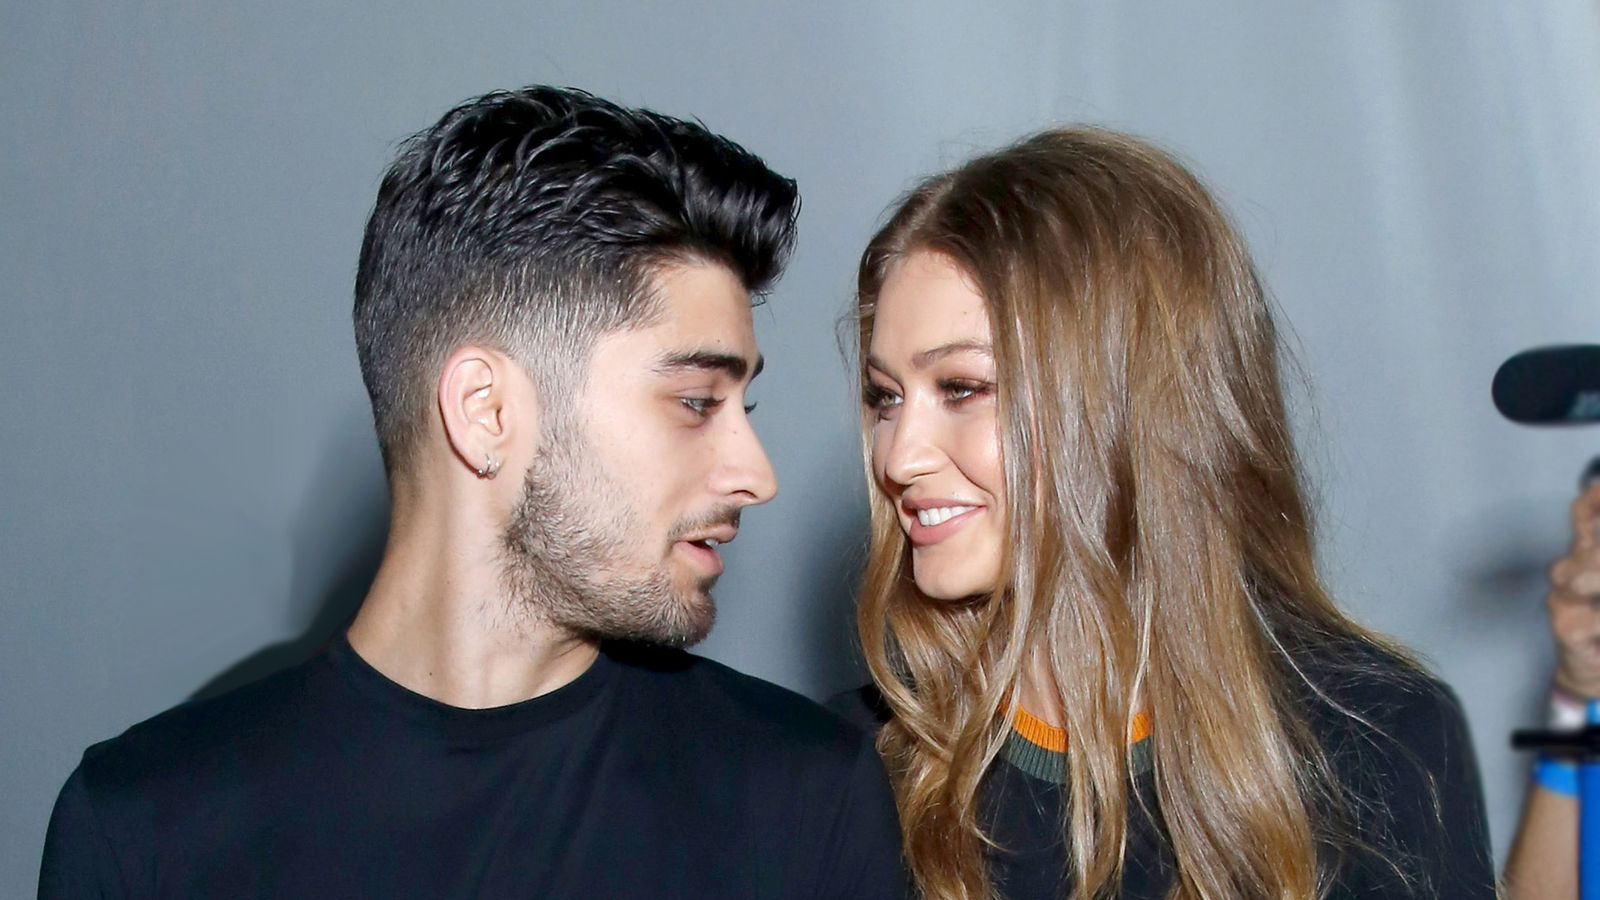 Gigi Hadid And Zayn Malik Are Expecting Their First Child, Supermodel Five Months Pregnant